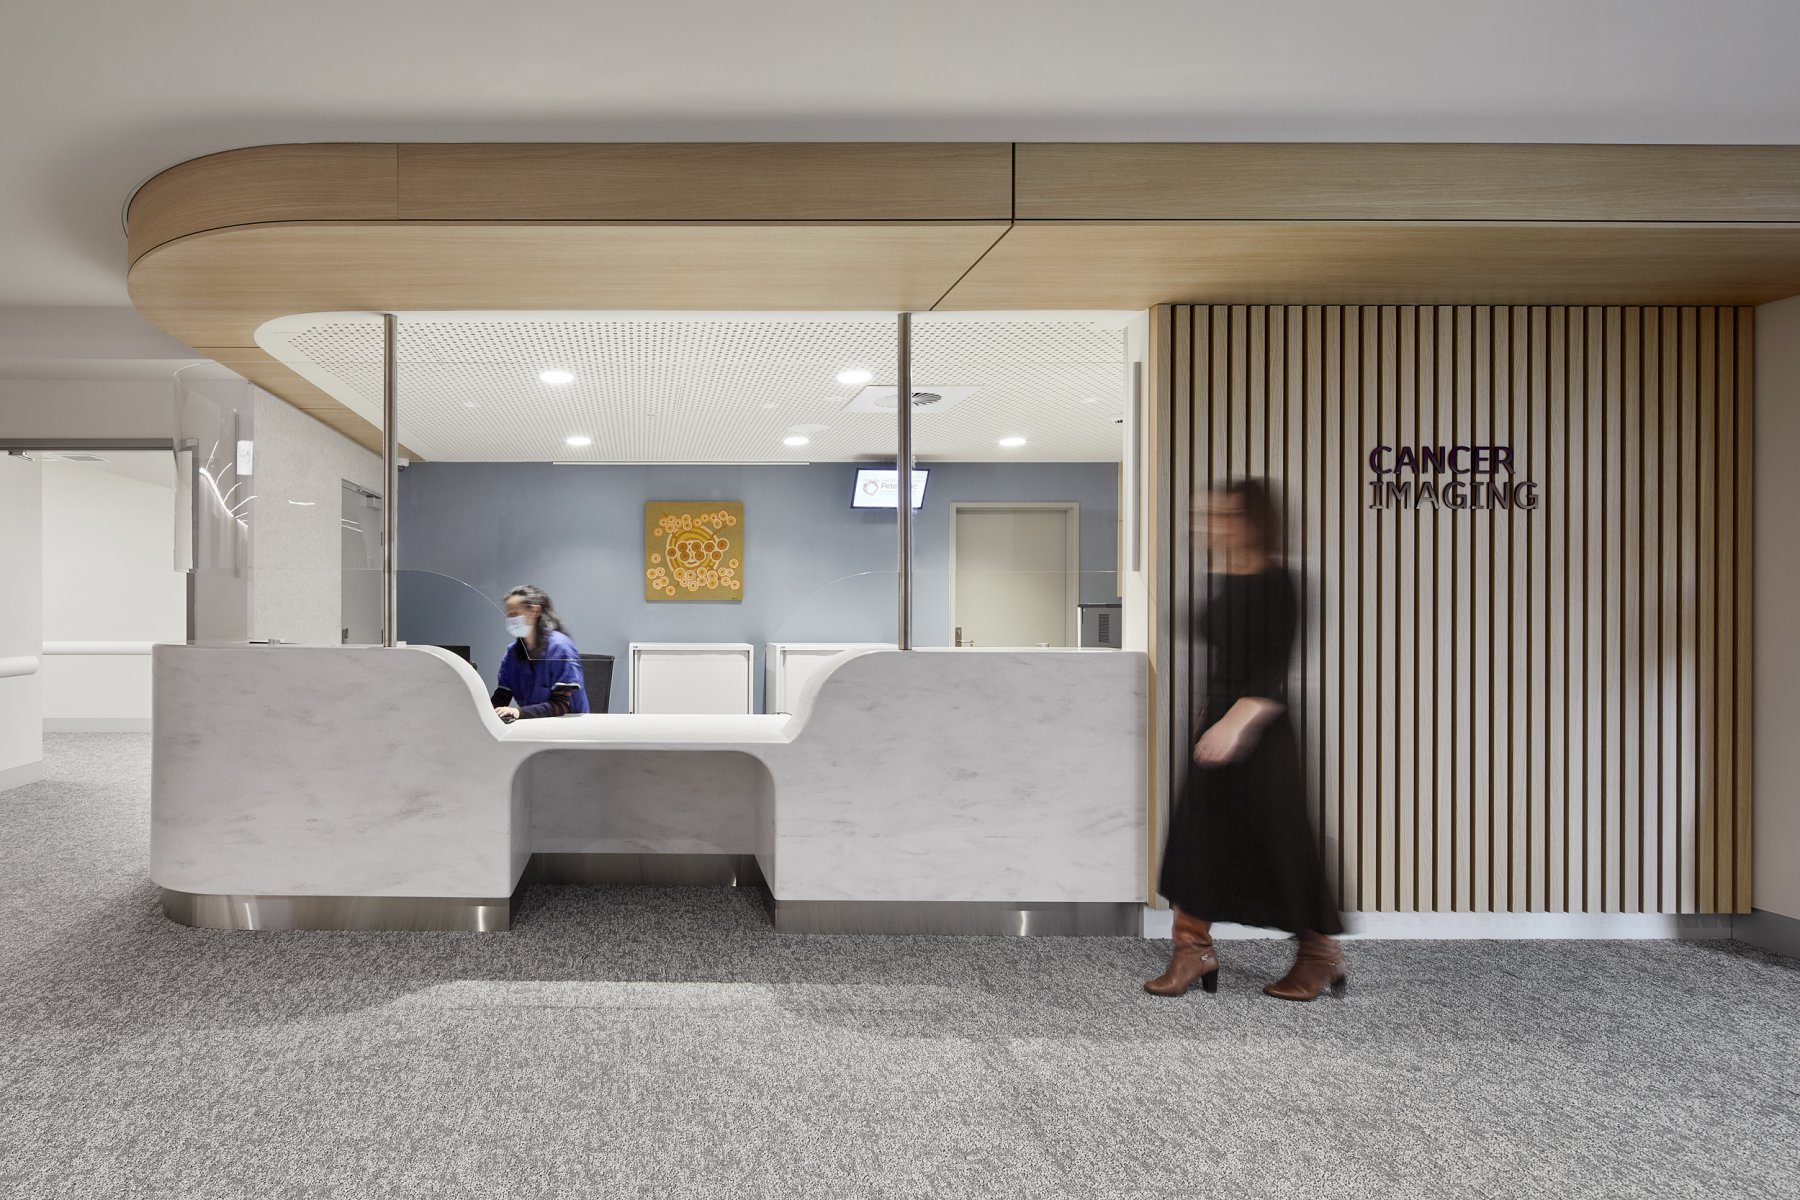 Project Image for Peter MacCallum Cancer Centre – Imaging Department Relocation